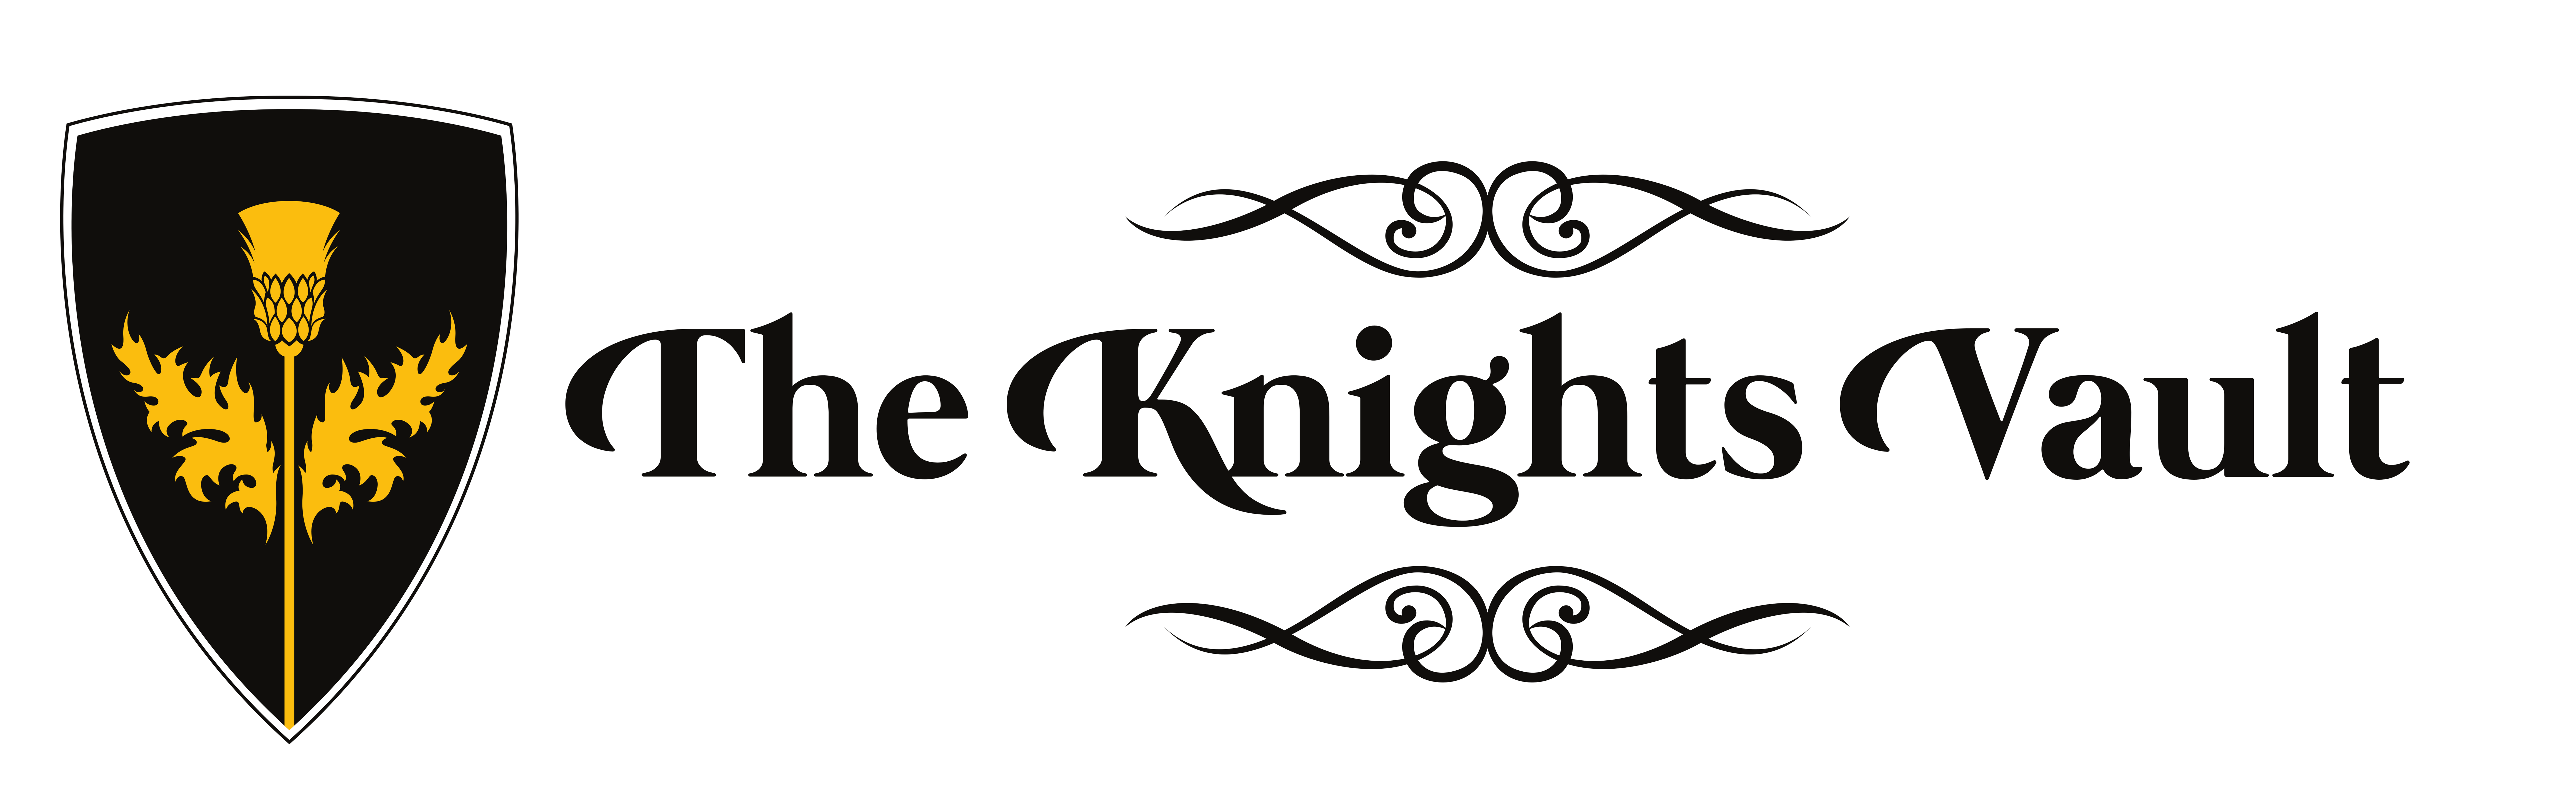 logo for The Knights Vault